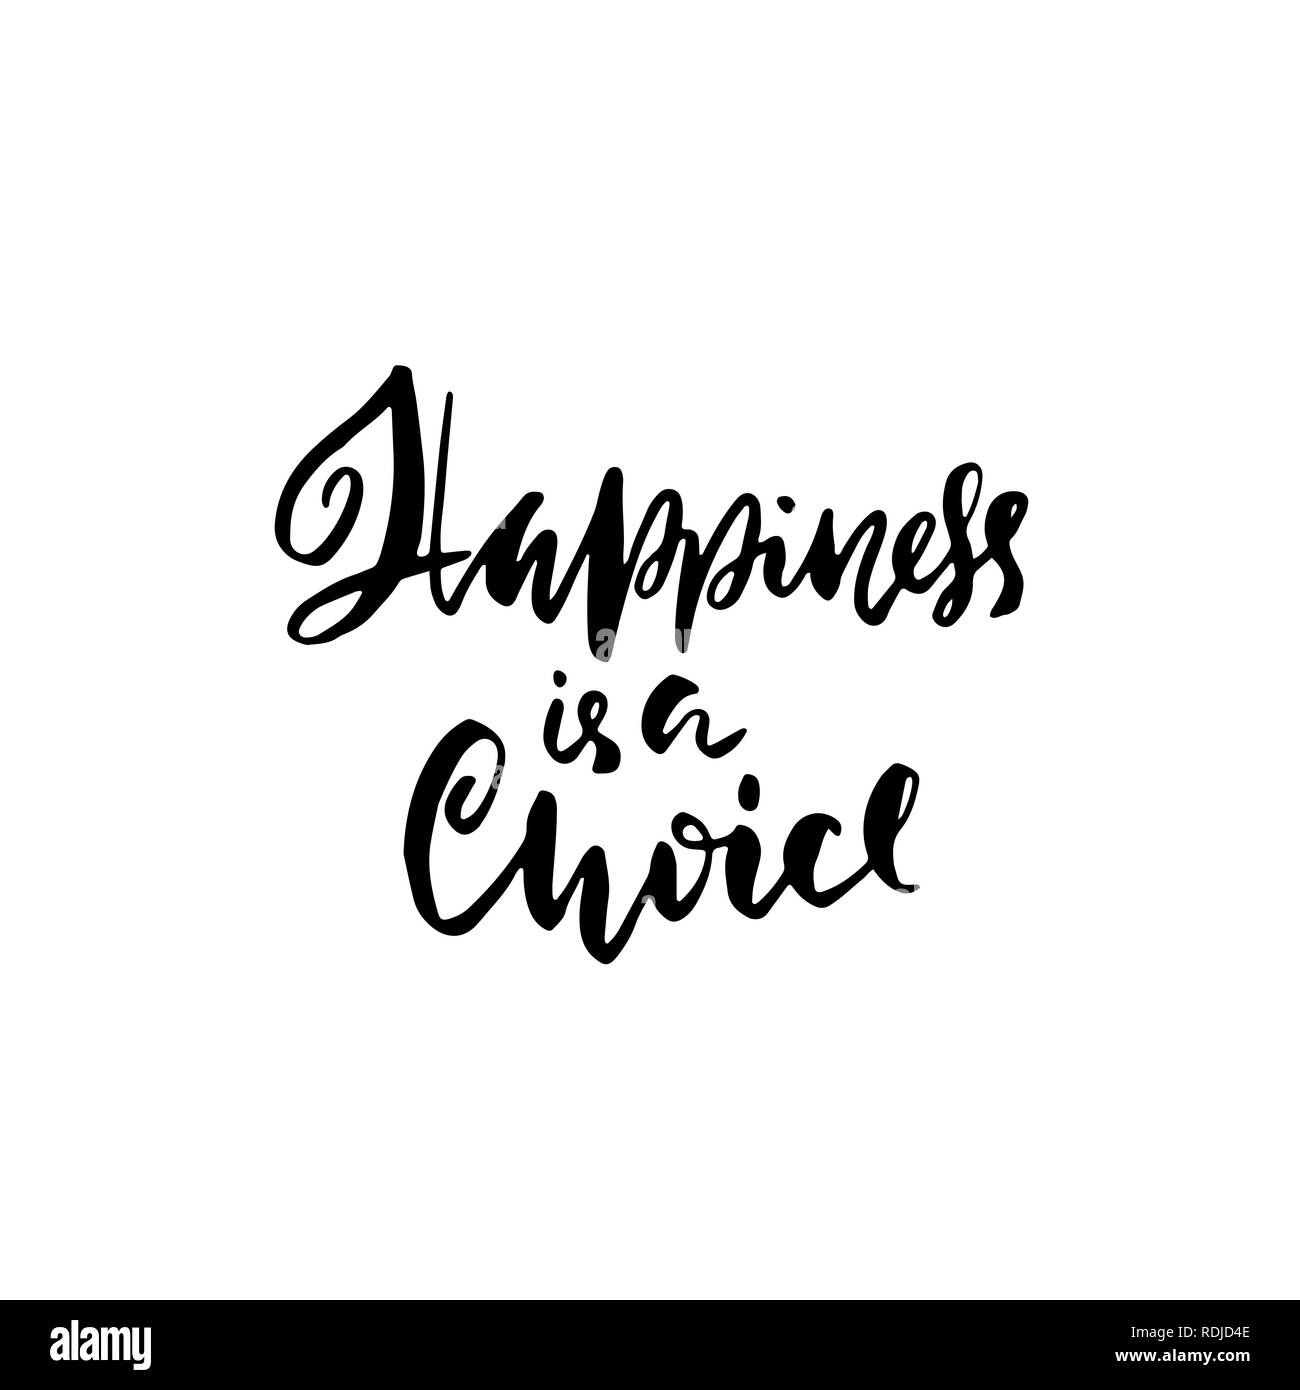 Happiness is a choice. Hand drawn brush lettering. Modern calligraphy. Ink vector illustration. Stock Vector